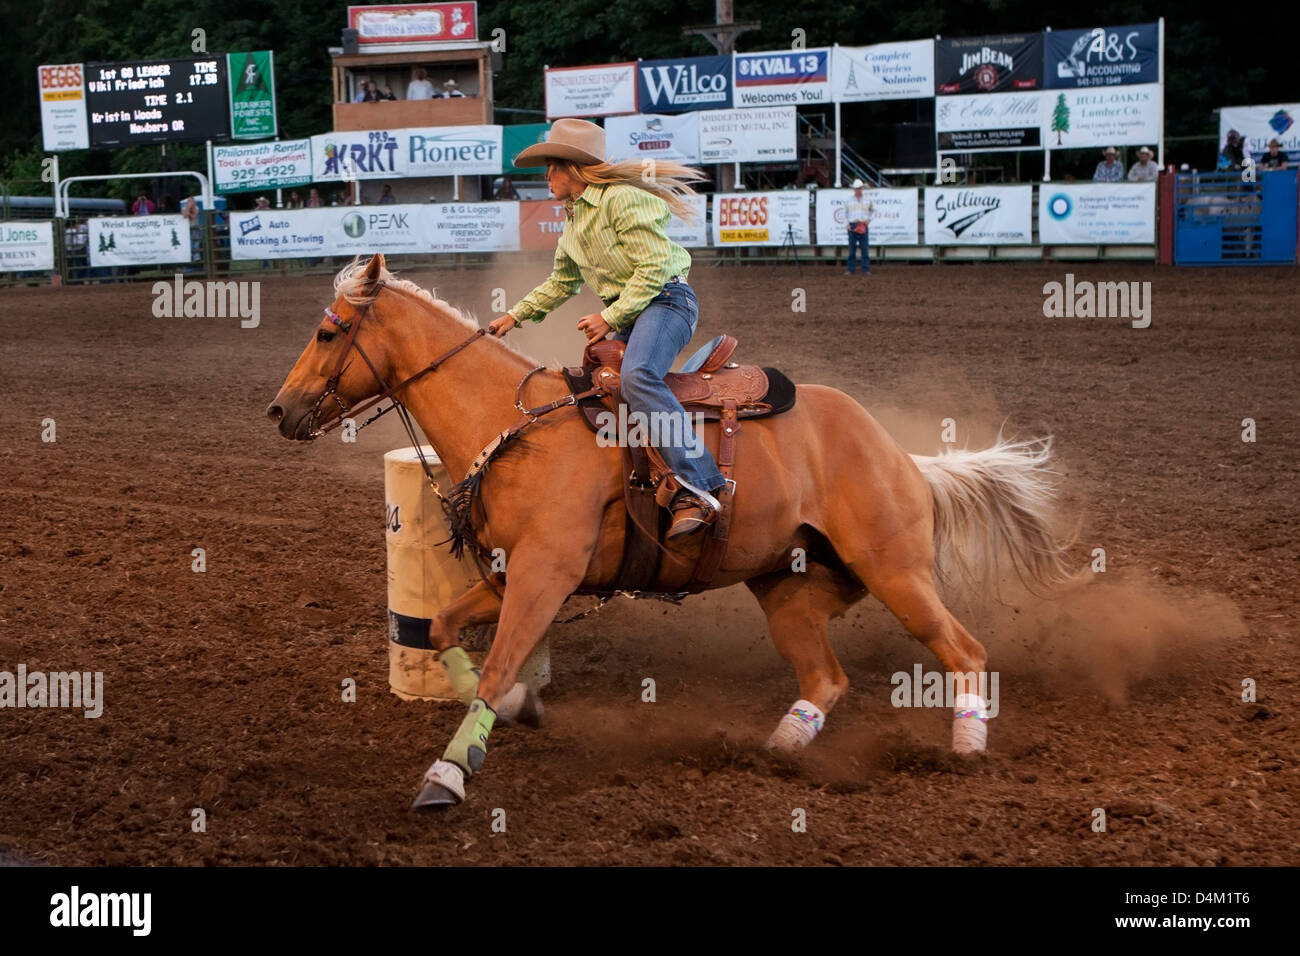 Woman riding horse at a rodeo show in Philomath, Oregon, USA. Stock Photo